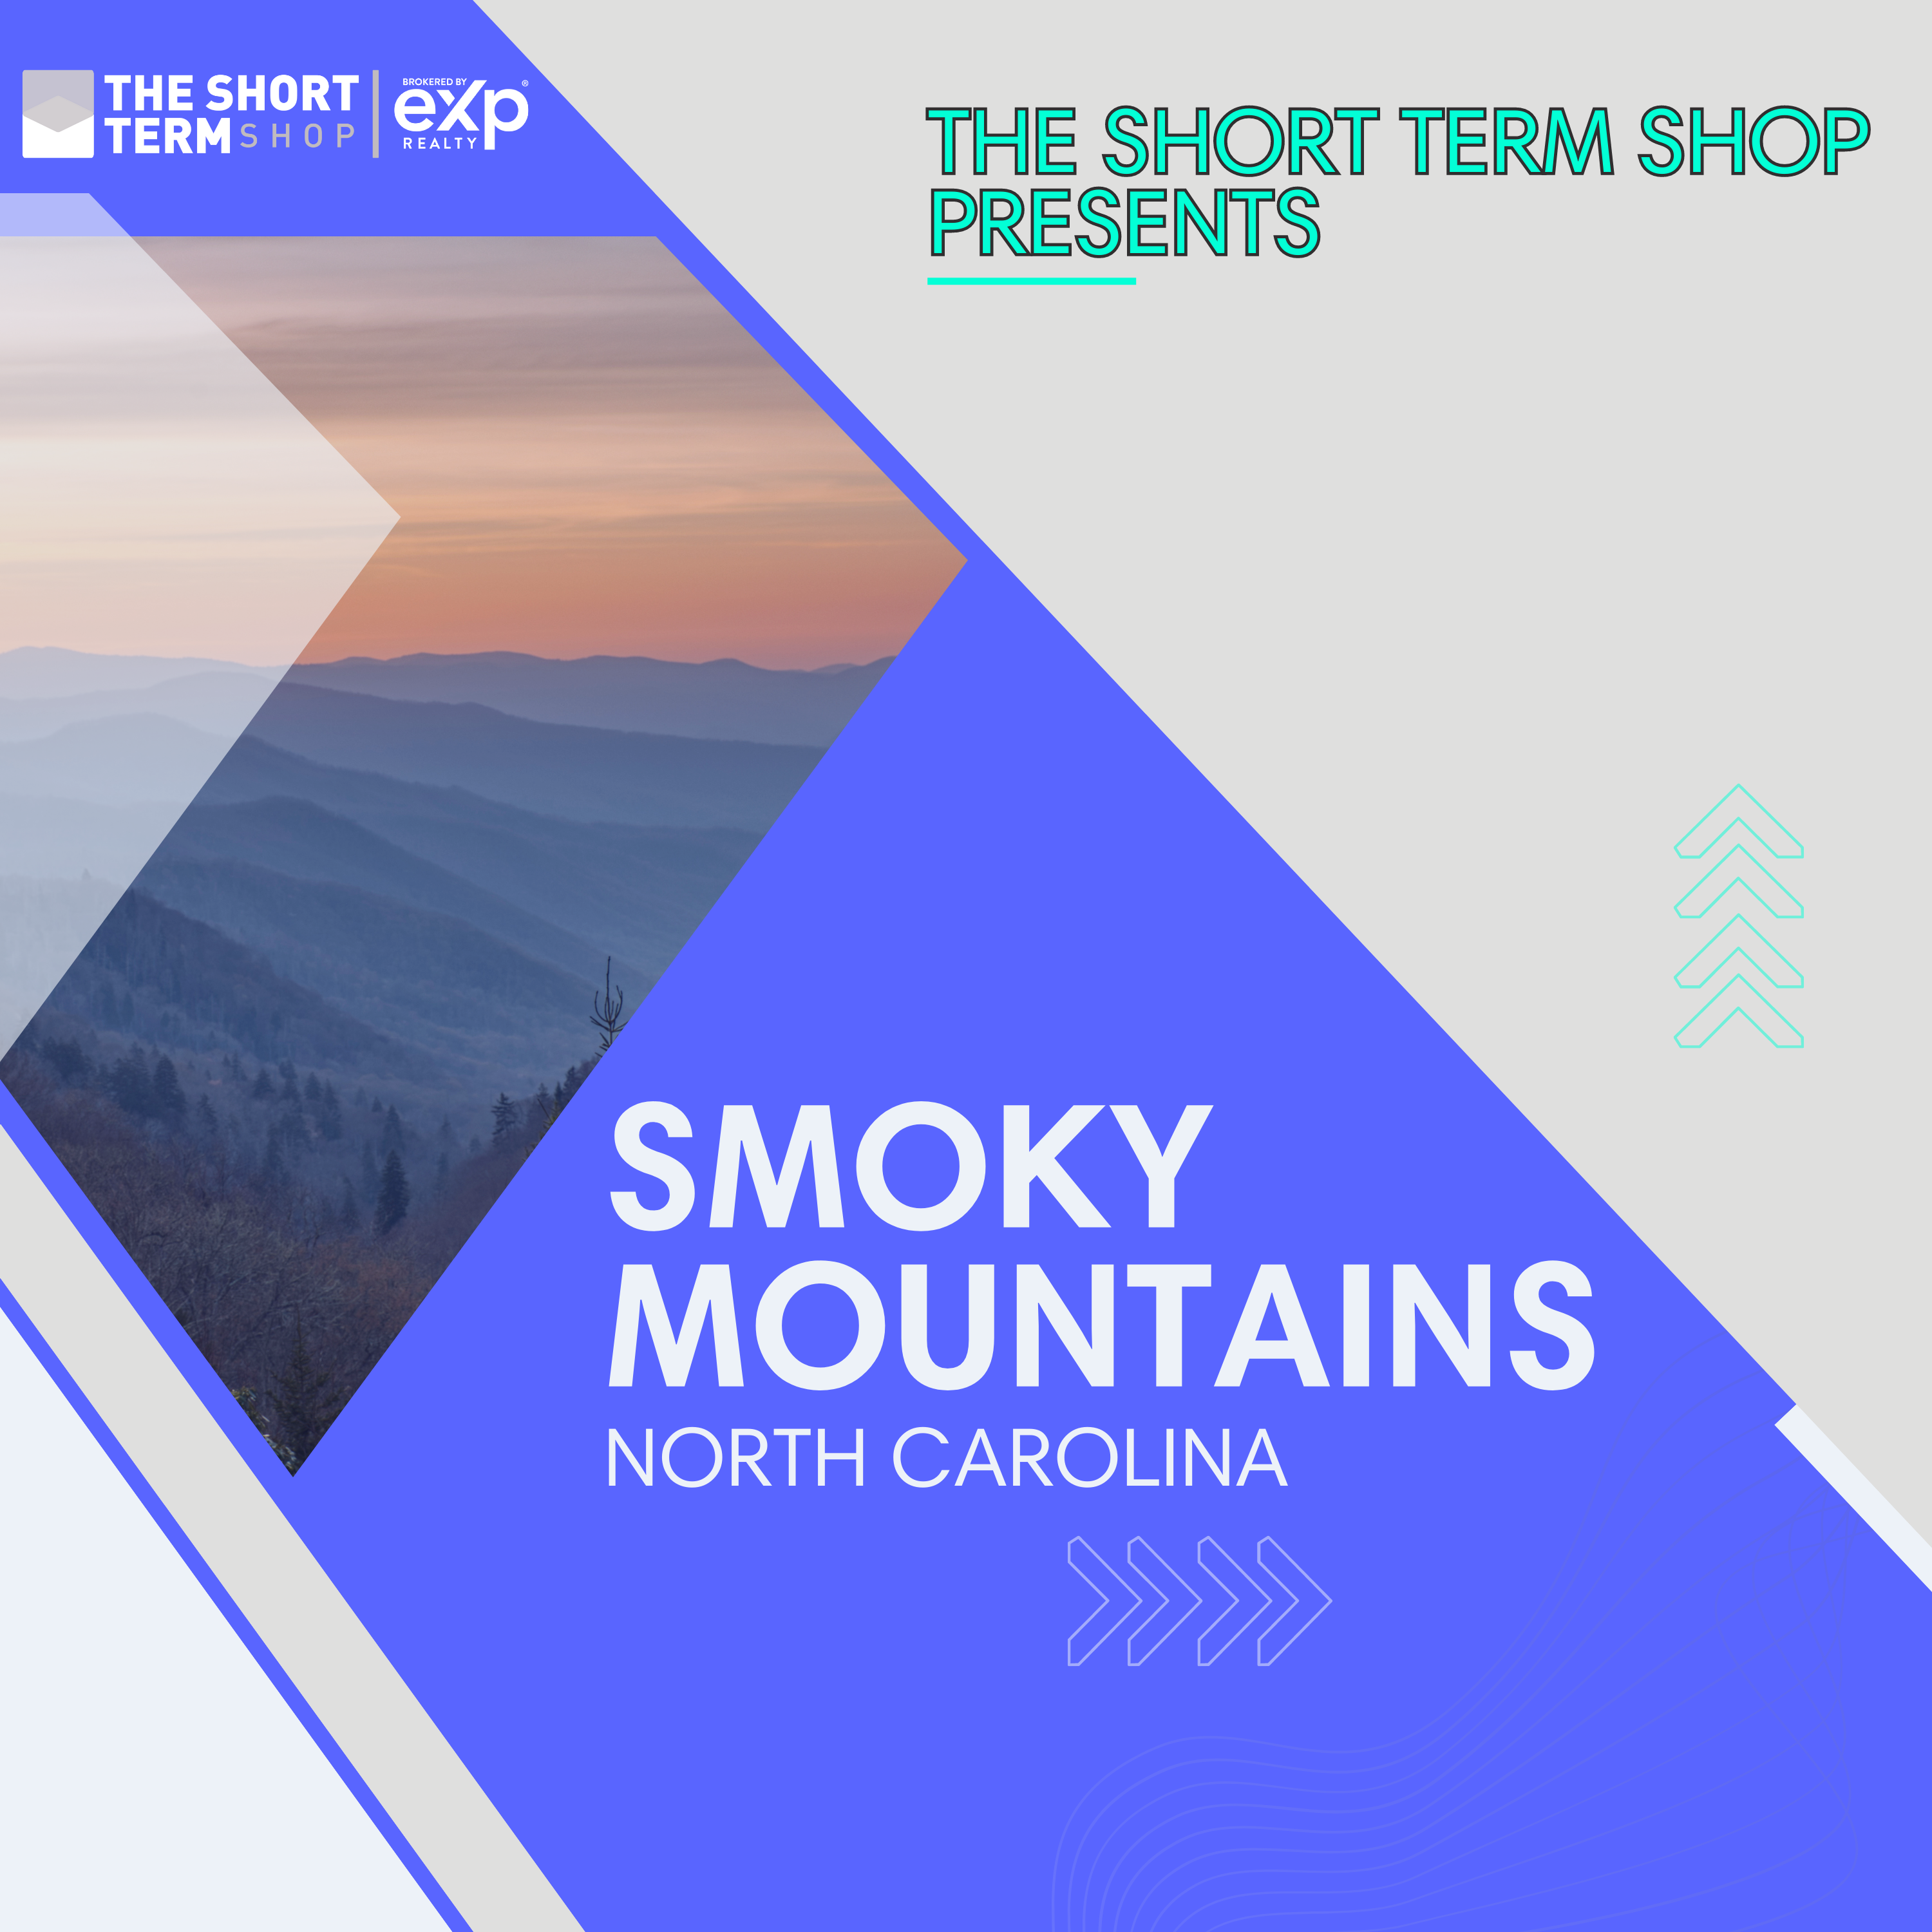 The Real Estate Contract Process When Investing in Short Term Rentals in The North Carolina Smoky Mountains